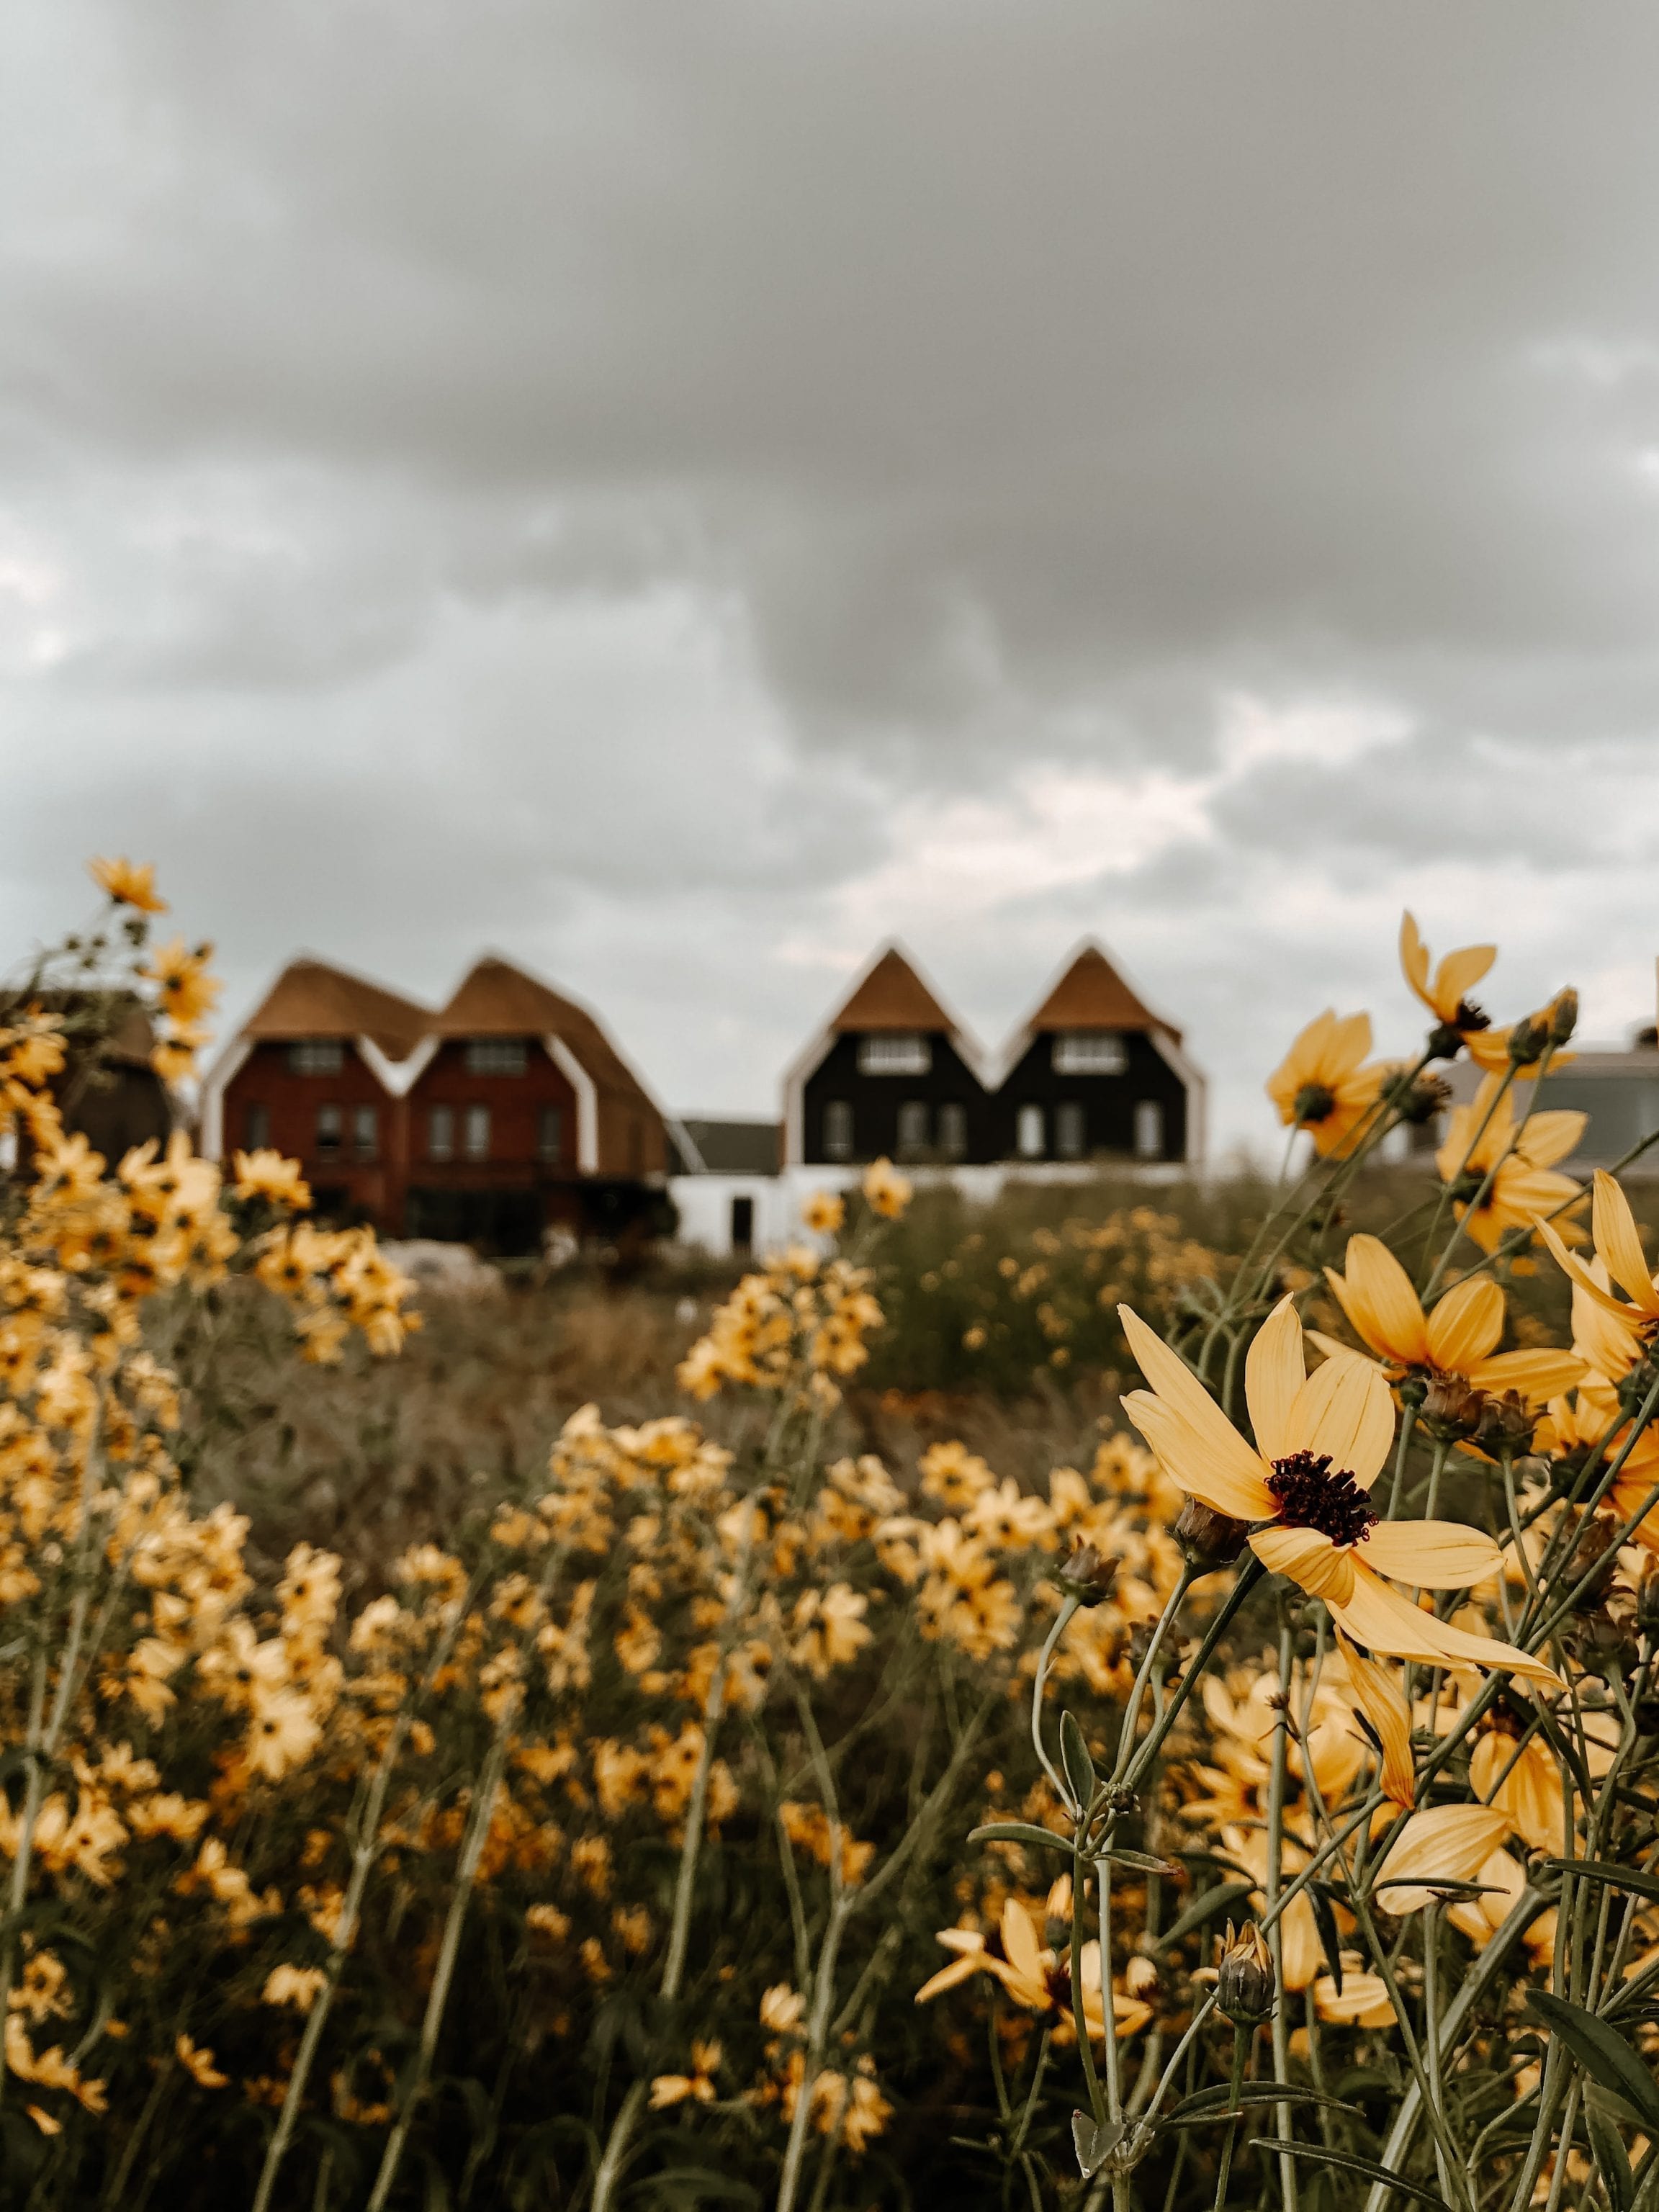 Image of houses and yellow flowers as demonstration on how to use focus in iphone camera